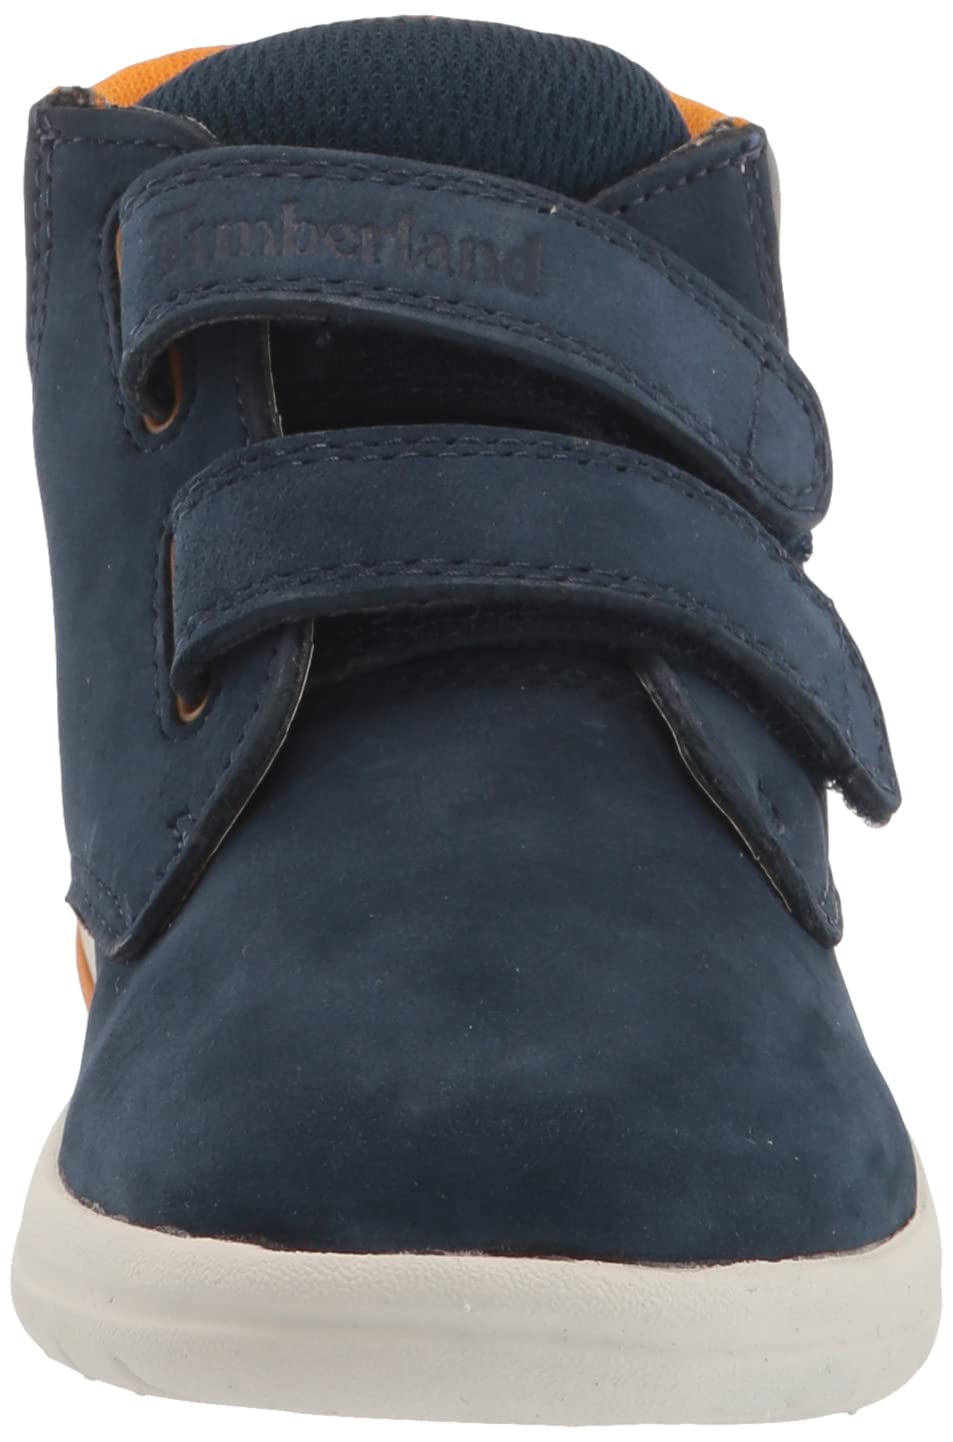 Timberland Unisex-Child Toddle Tracks Hook-and-Loop Bootie